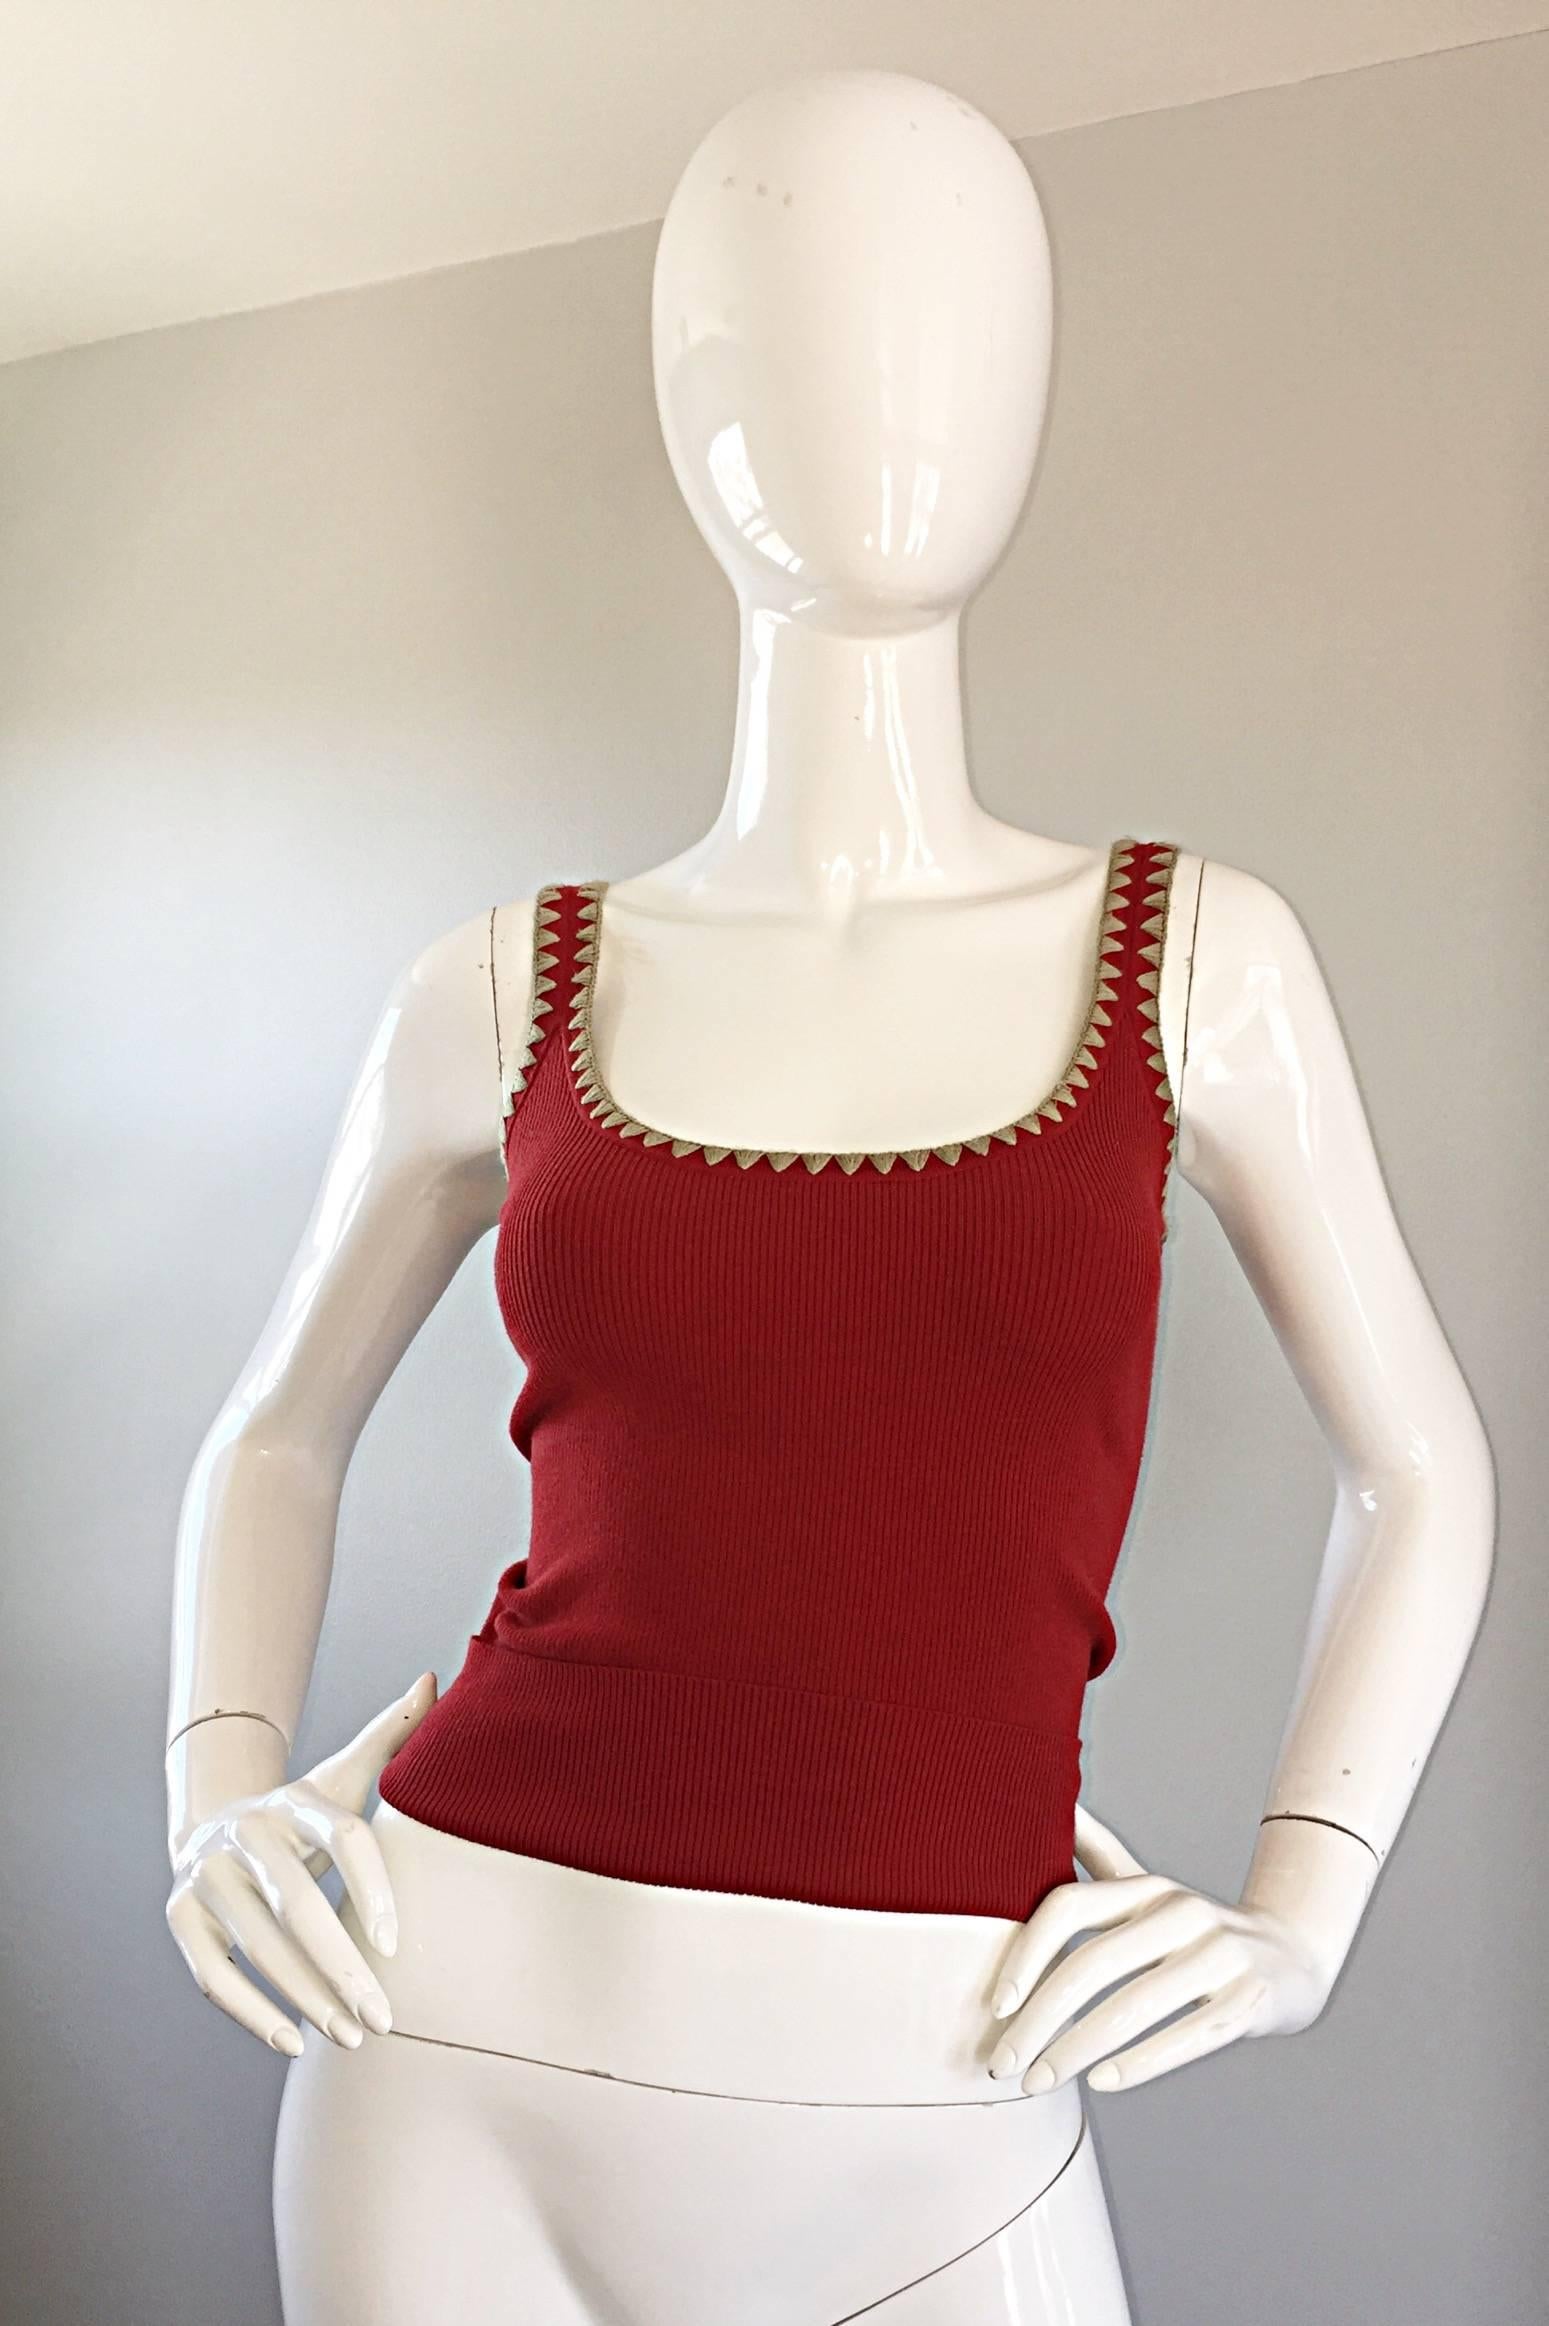 Sexy vintage MICHAEL KORS COLLECTION 90s cotton cropped top! Features tan embroidered 'Aztec' thread around the bust and arms on the front and back. Cuffed hem adds just the right amount of detail. This is from his high level Runway Collection. Easy